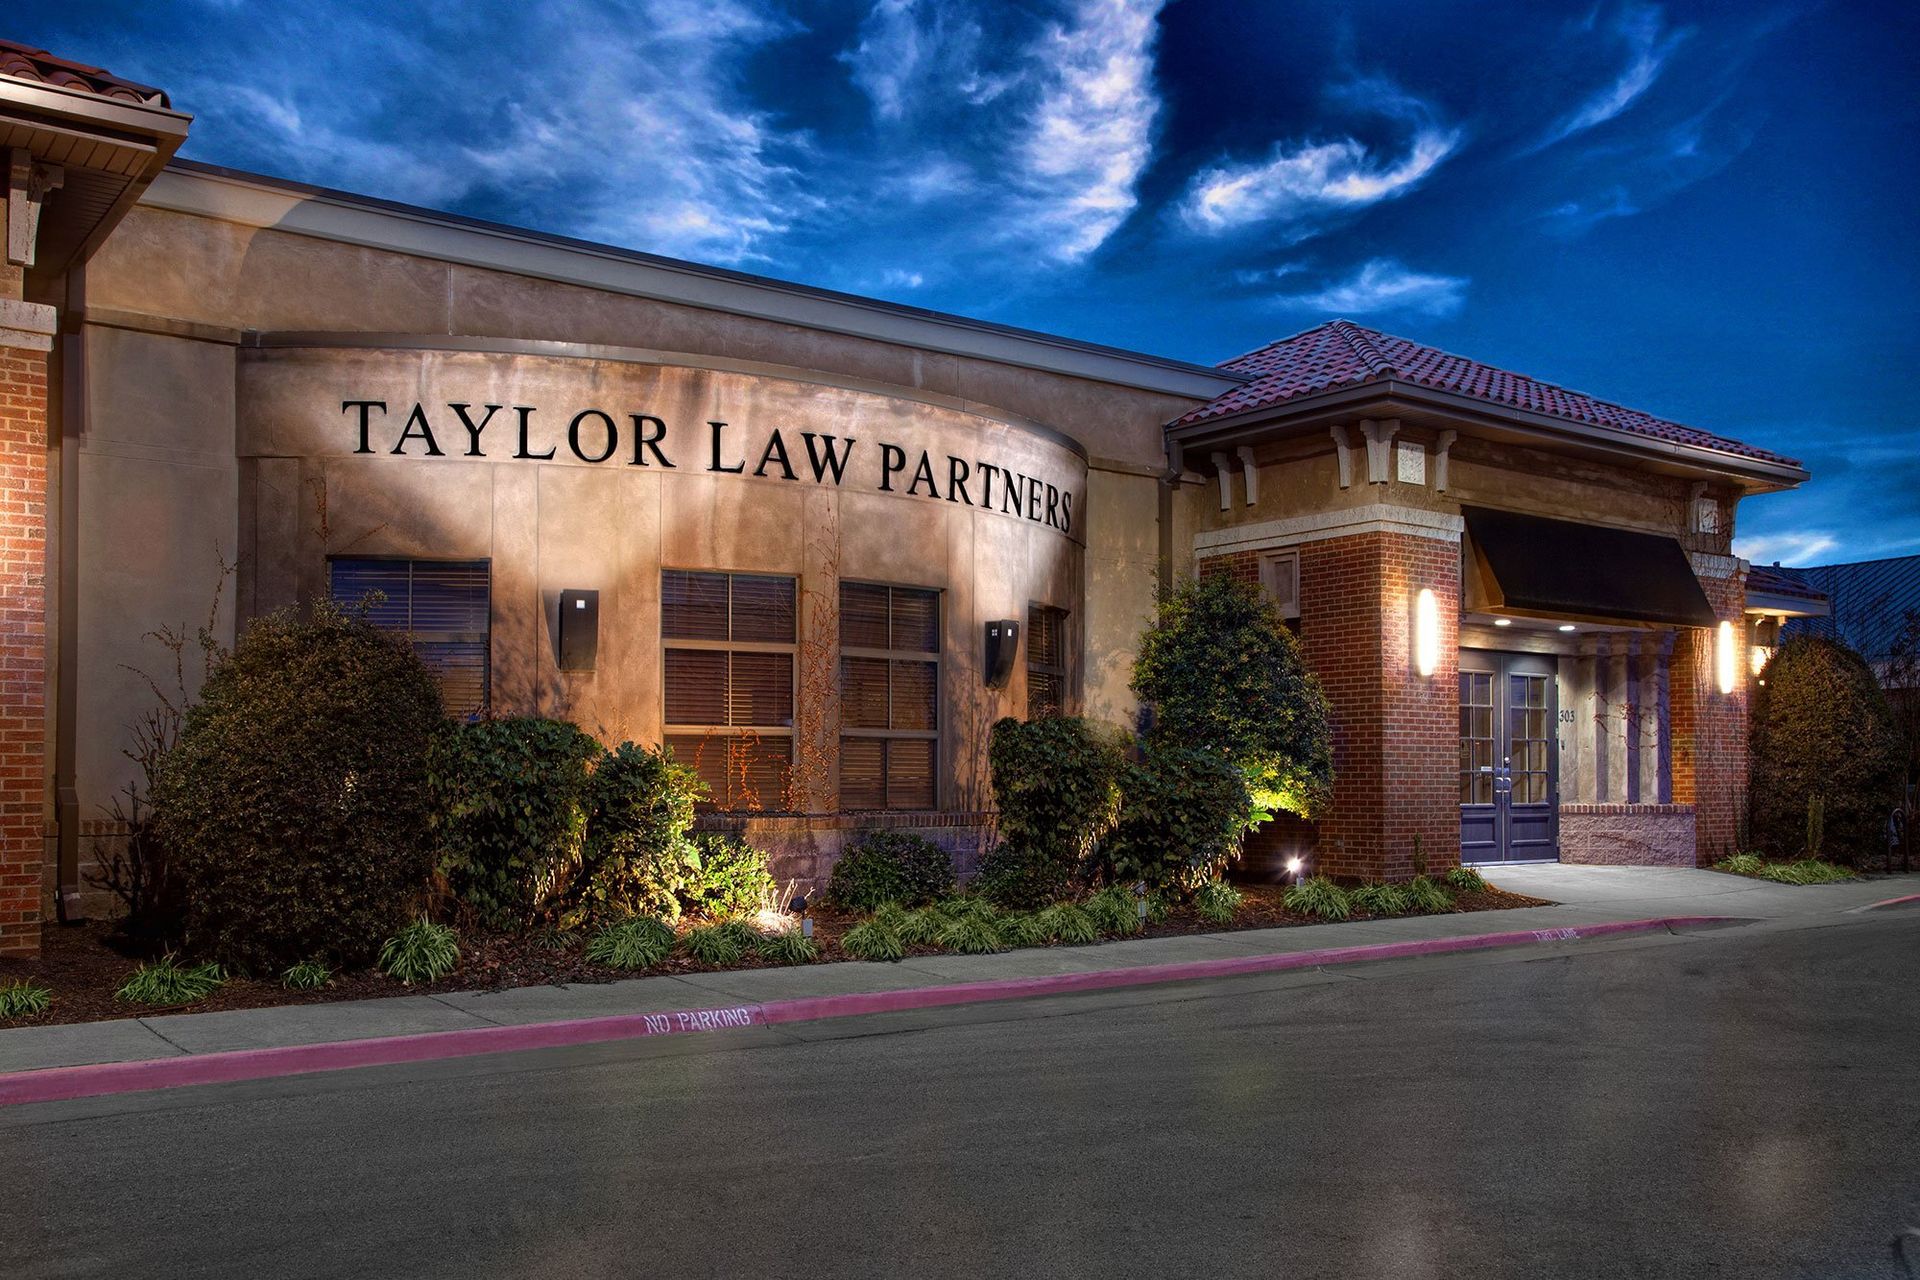 Taylor Law Partners building, outside view